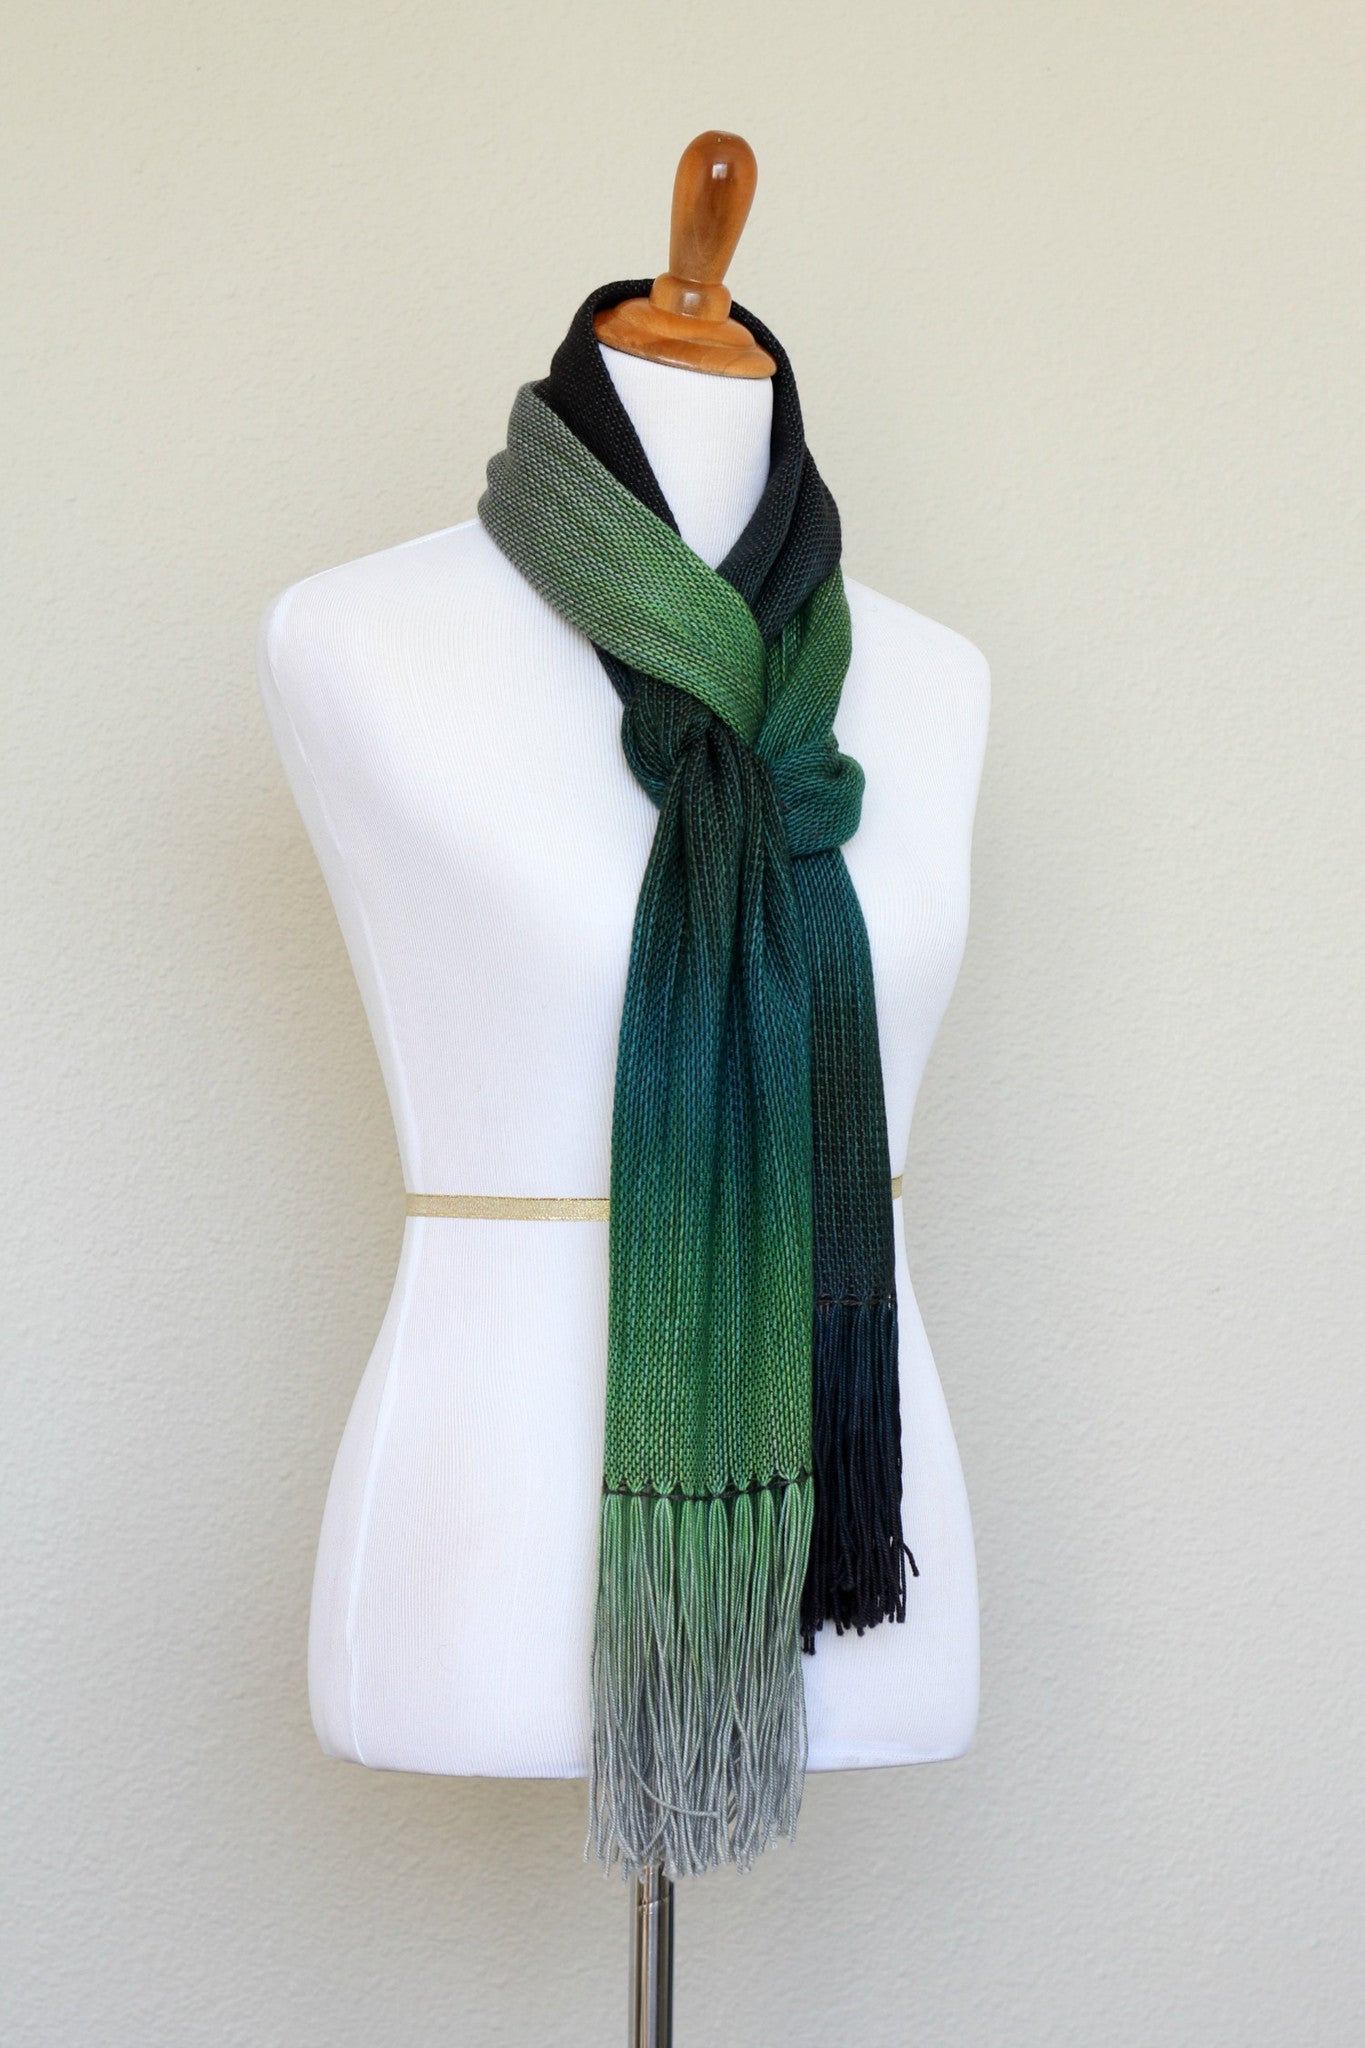 Woven scarf in green and grey colors, woven wrap